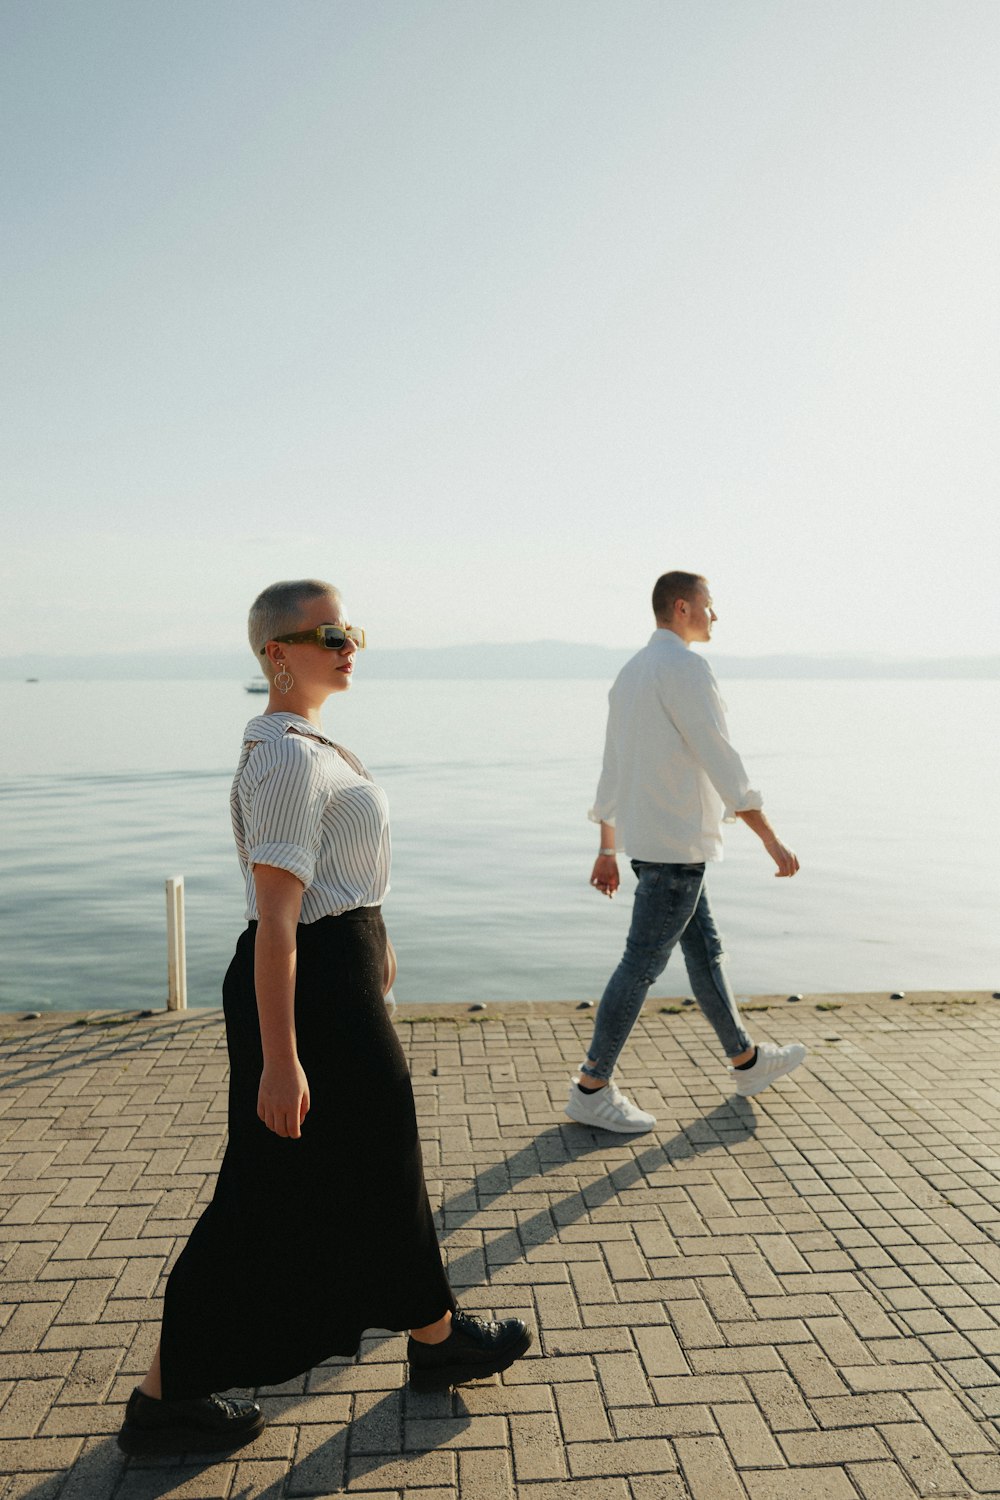 a man and a woman walking on a brick walkway near the water